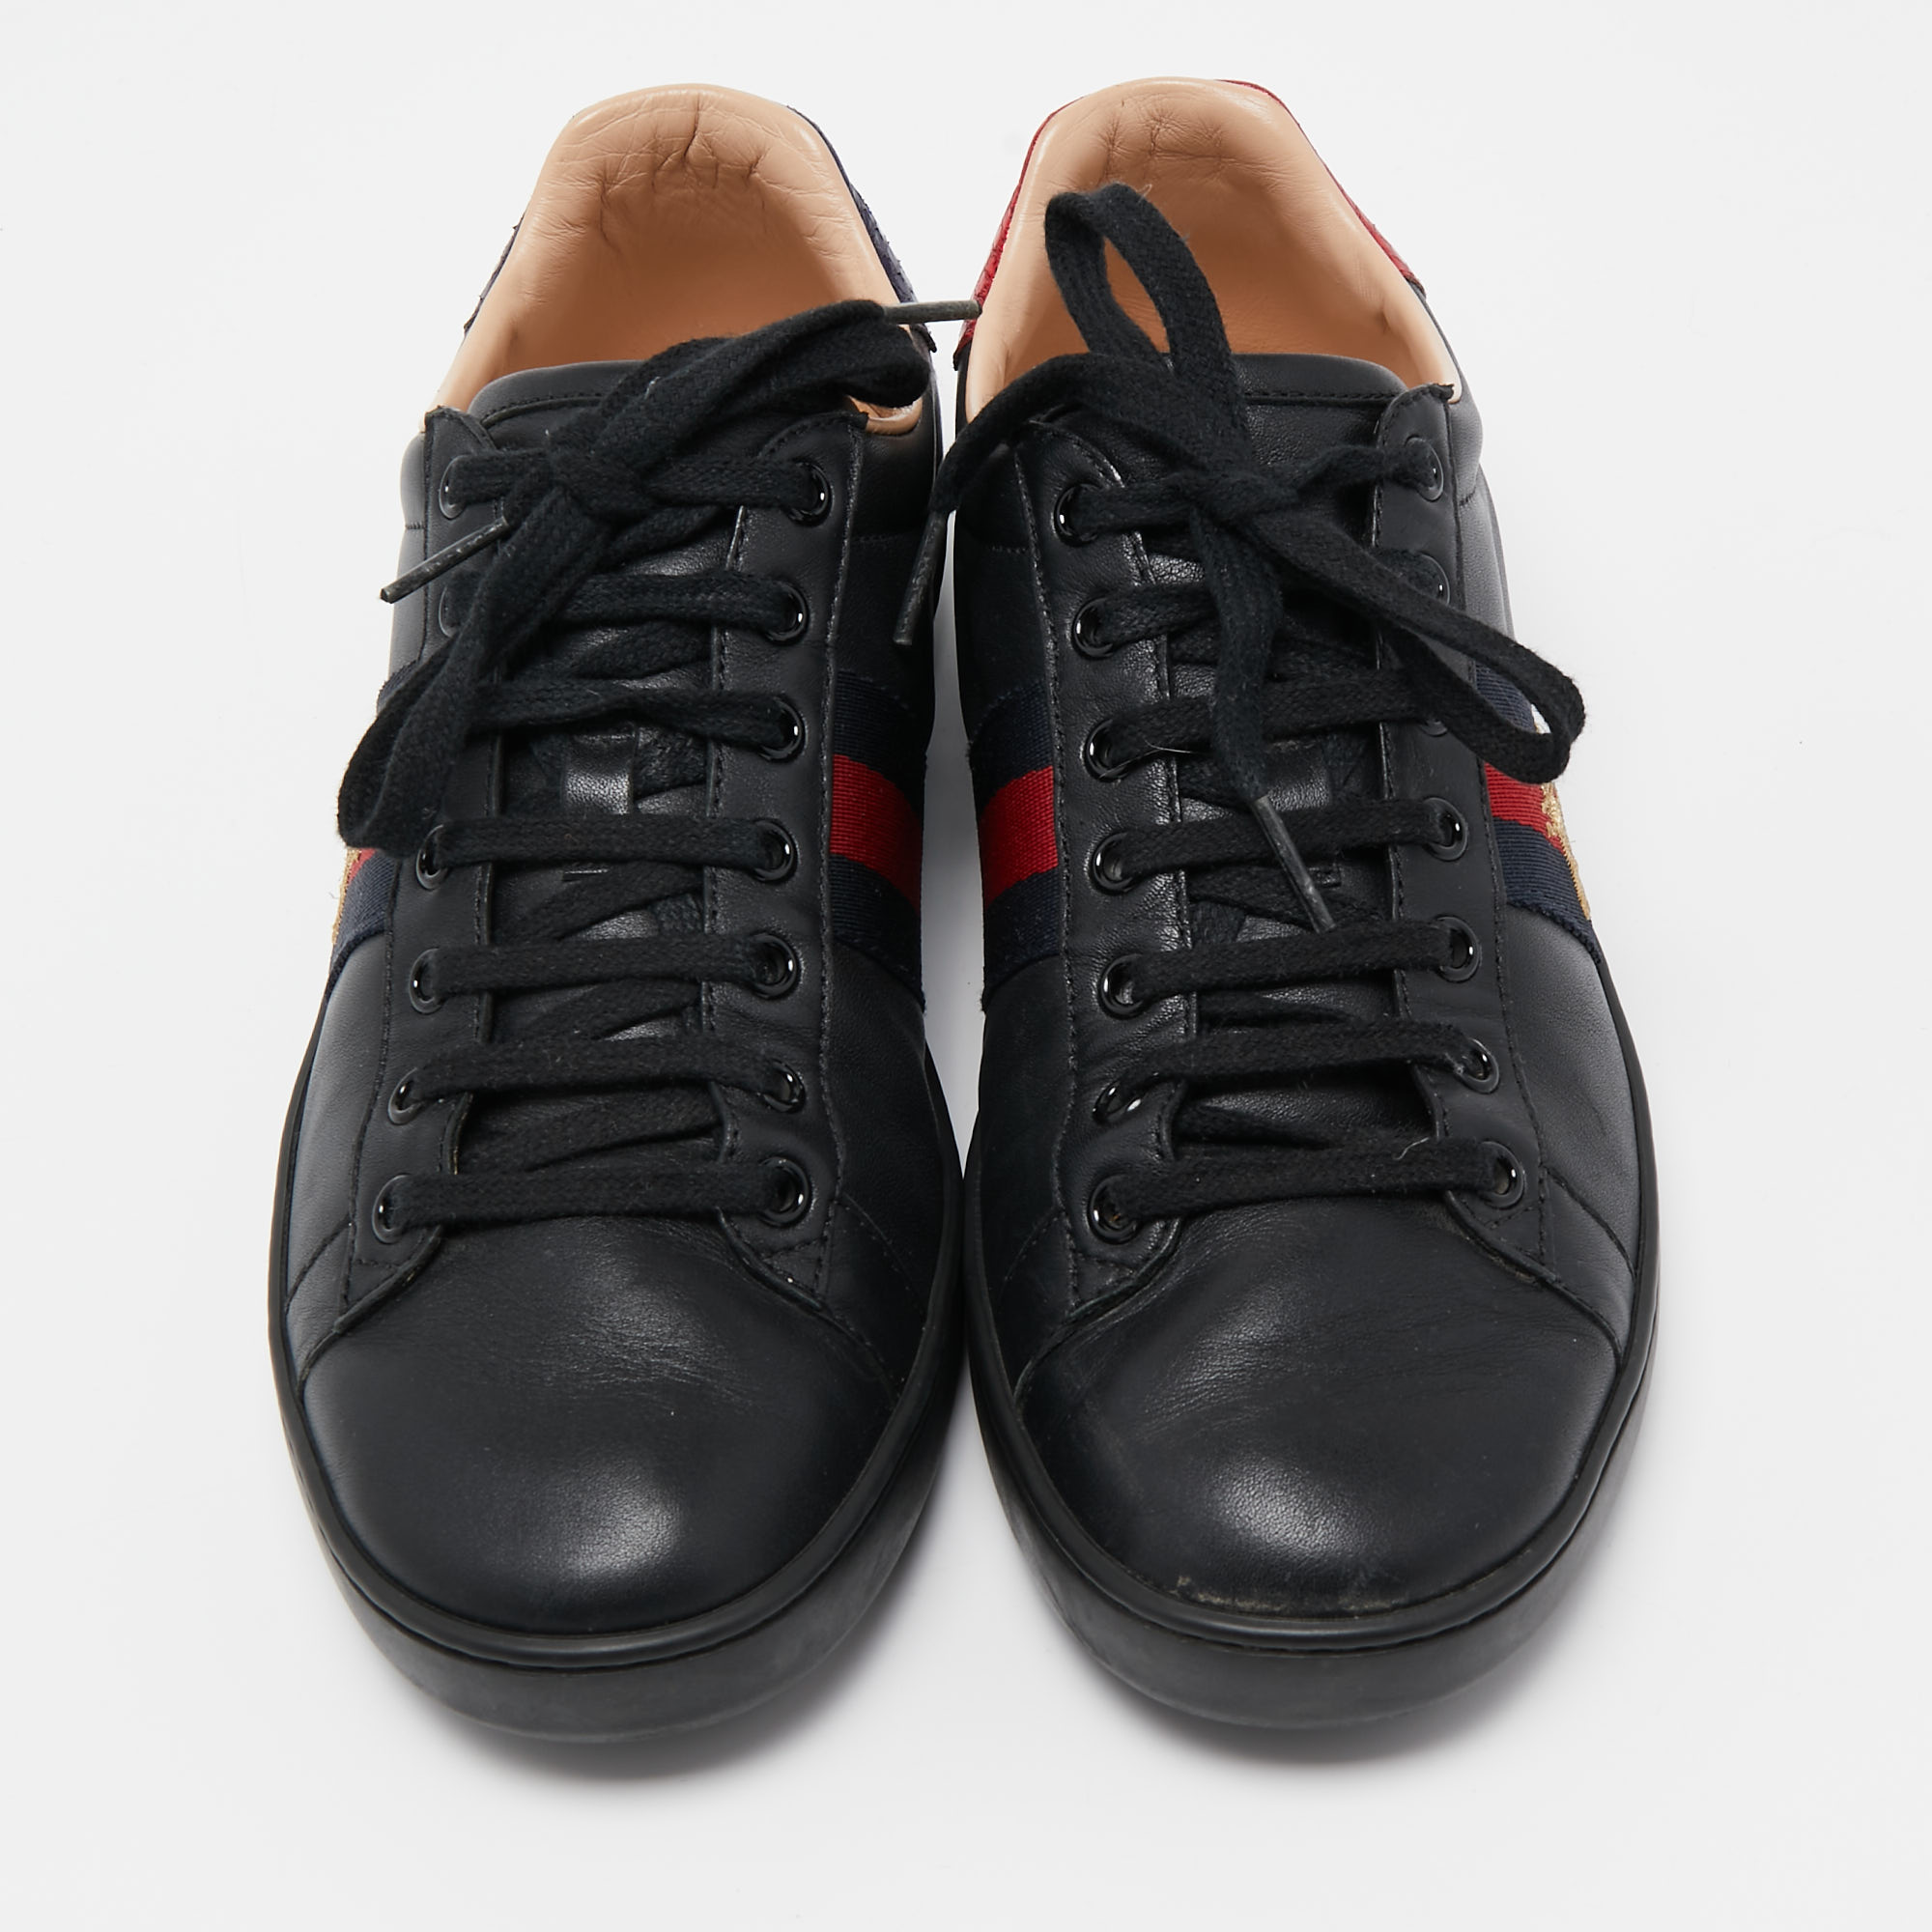 Gucci Black Leather Ace Web Low Top Sneakers Size 38.5